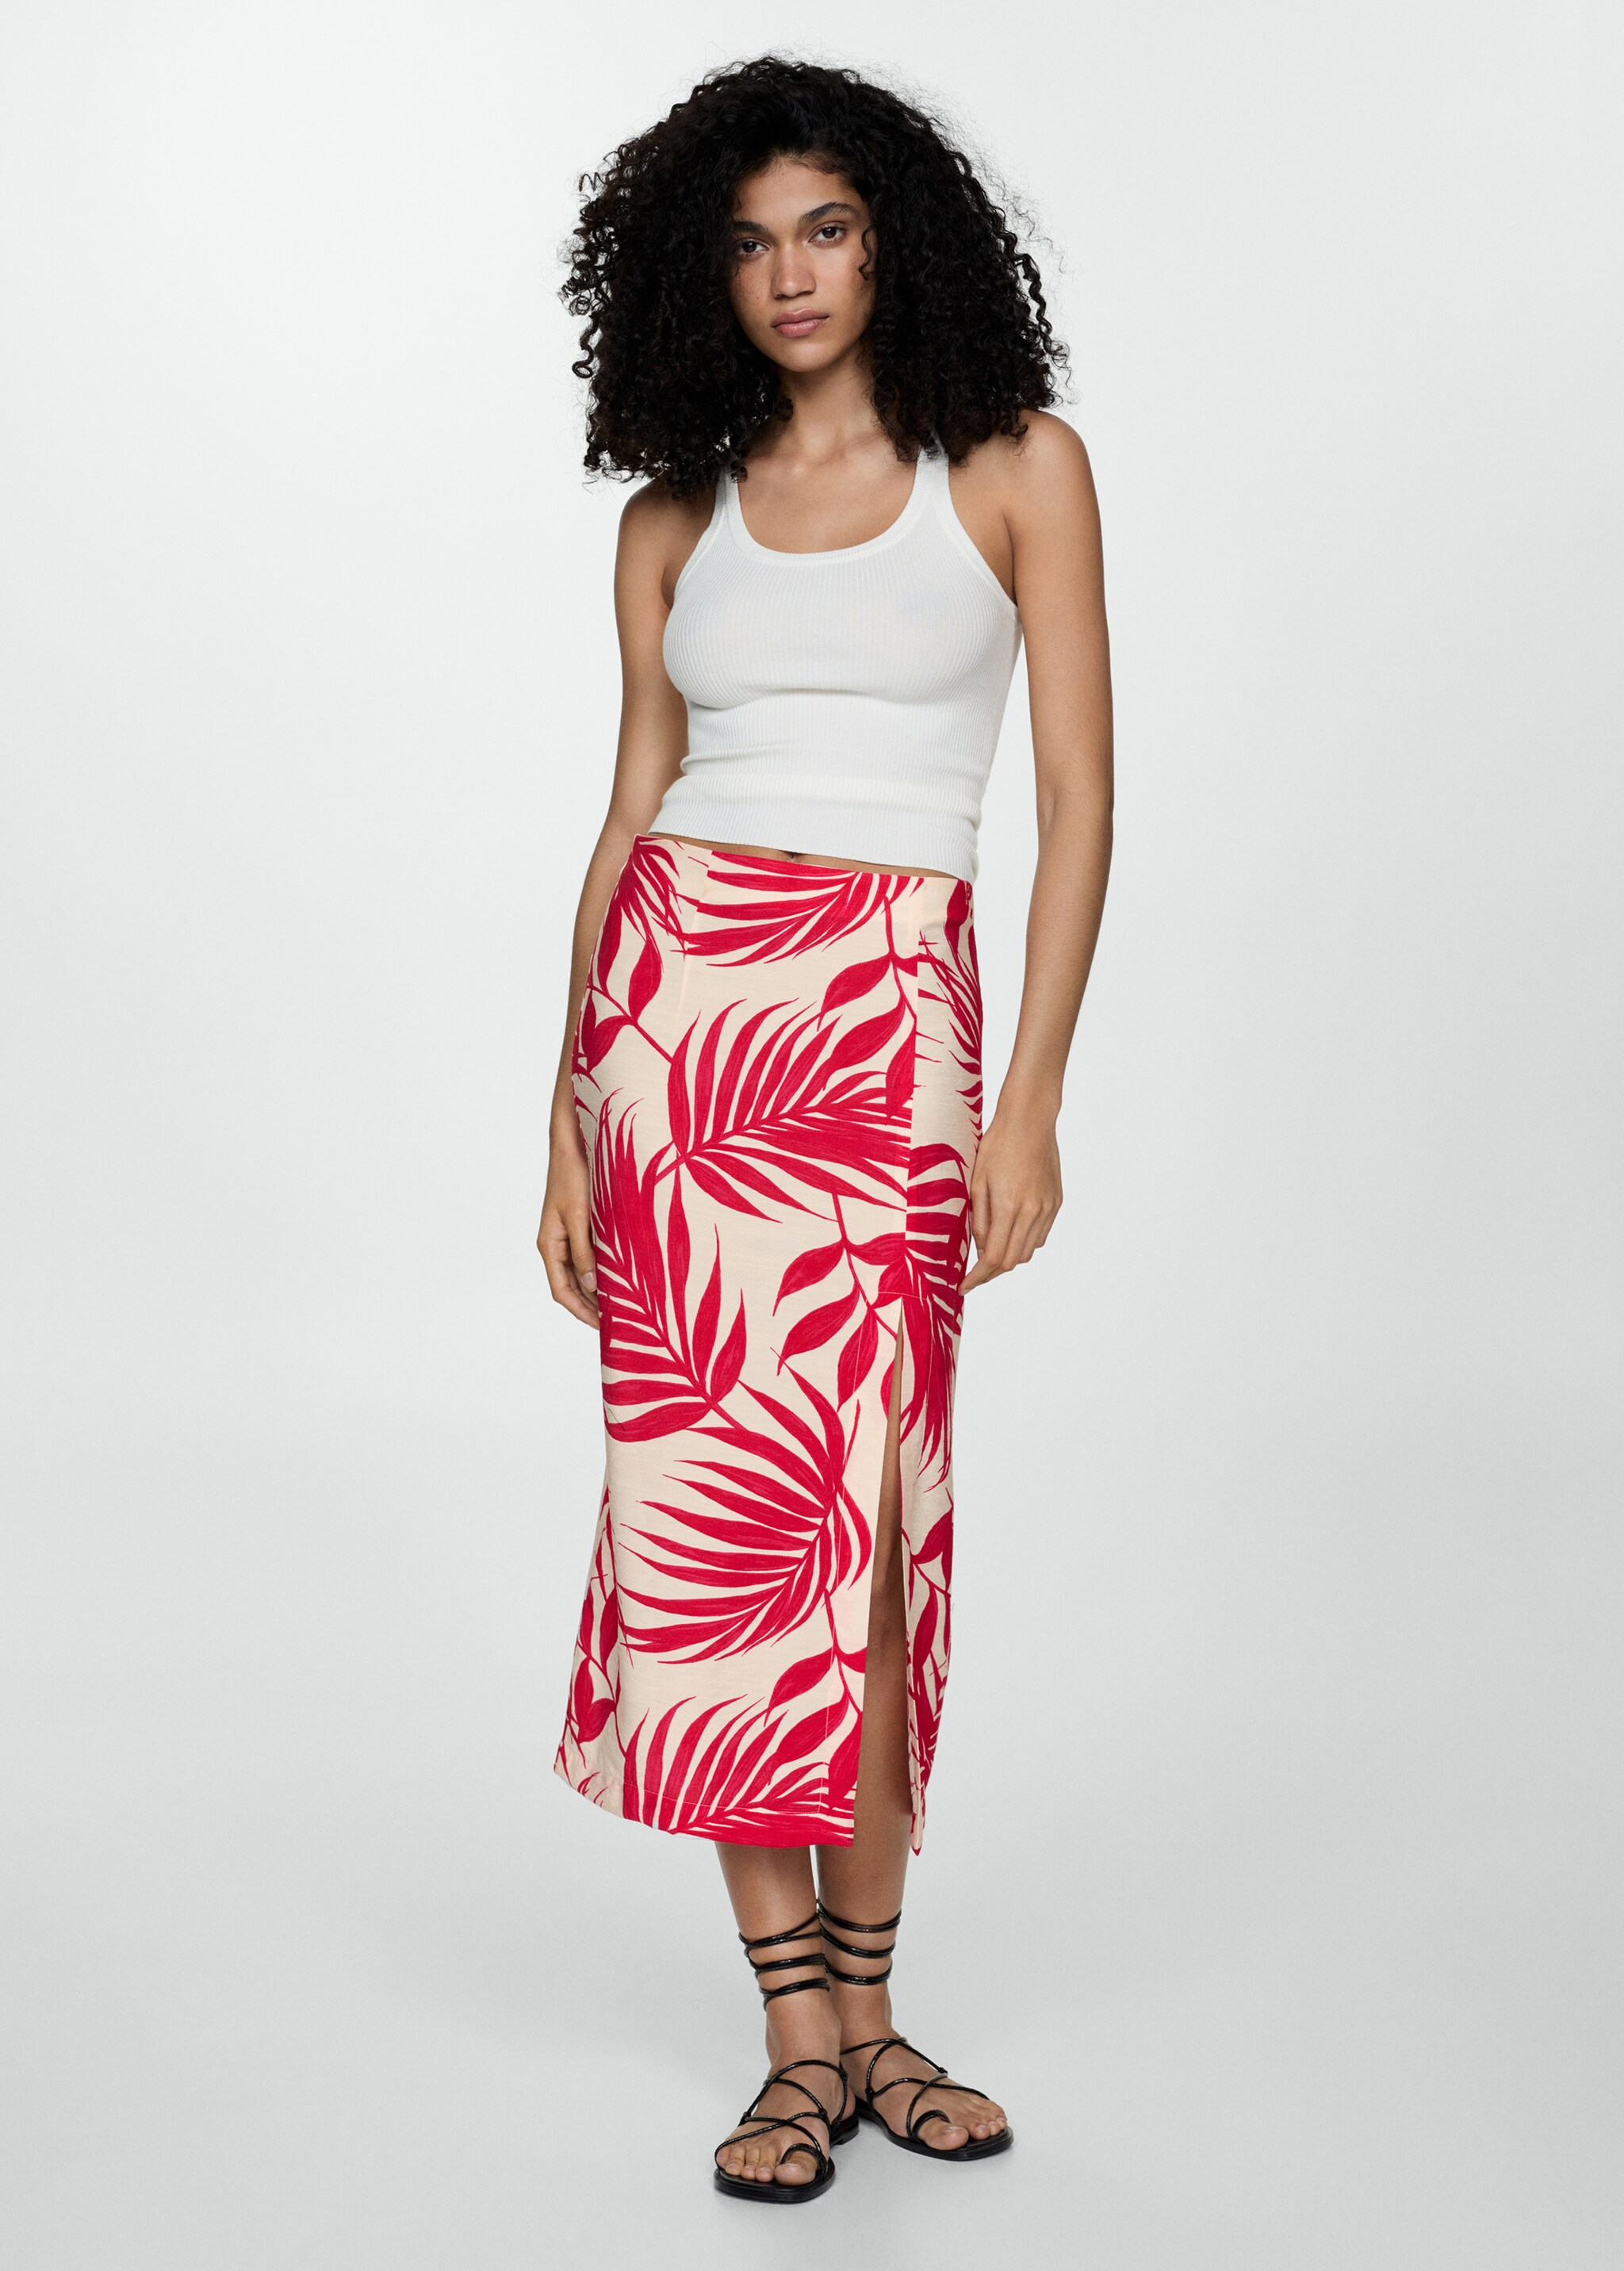 Printed skirt with slit - General plane